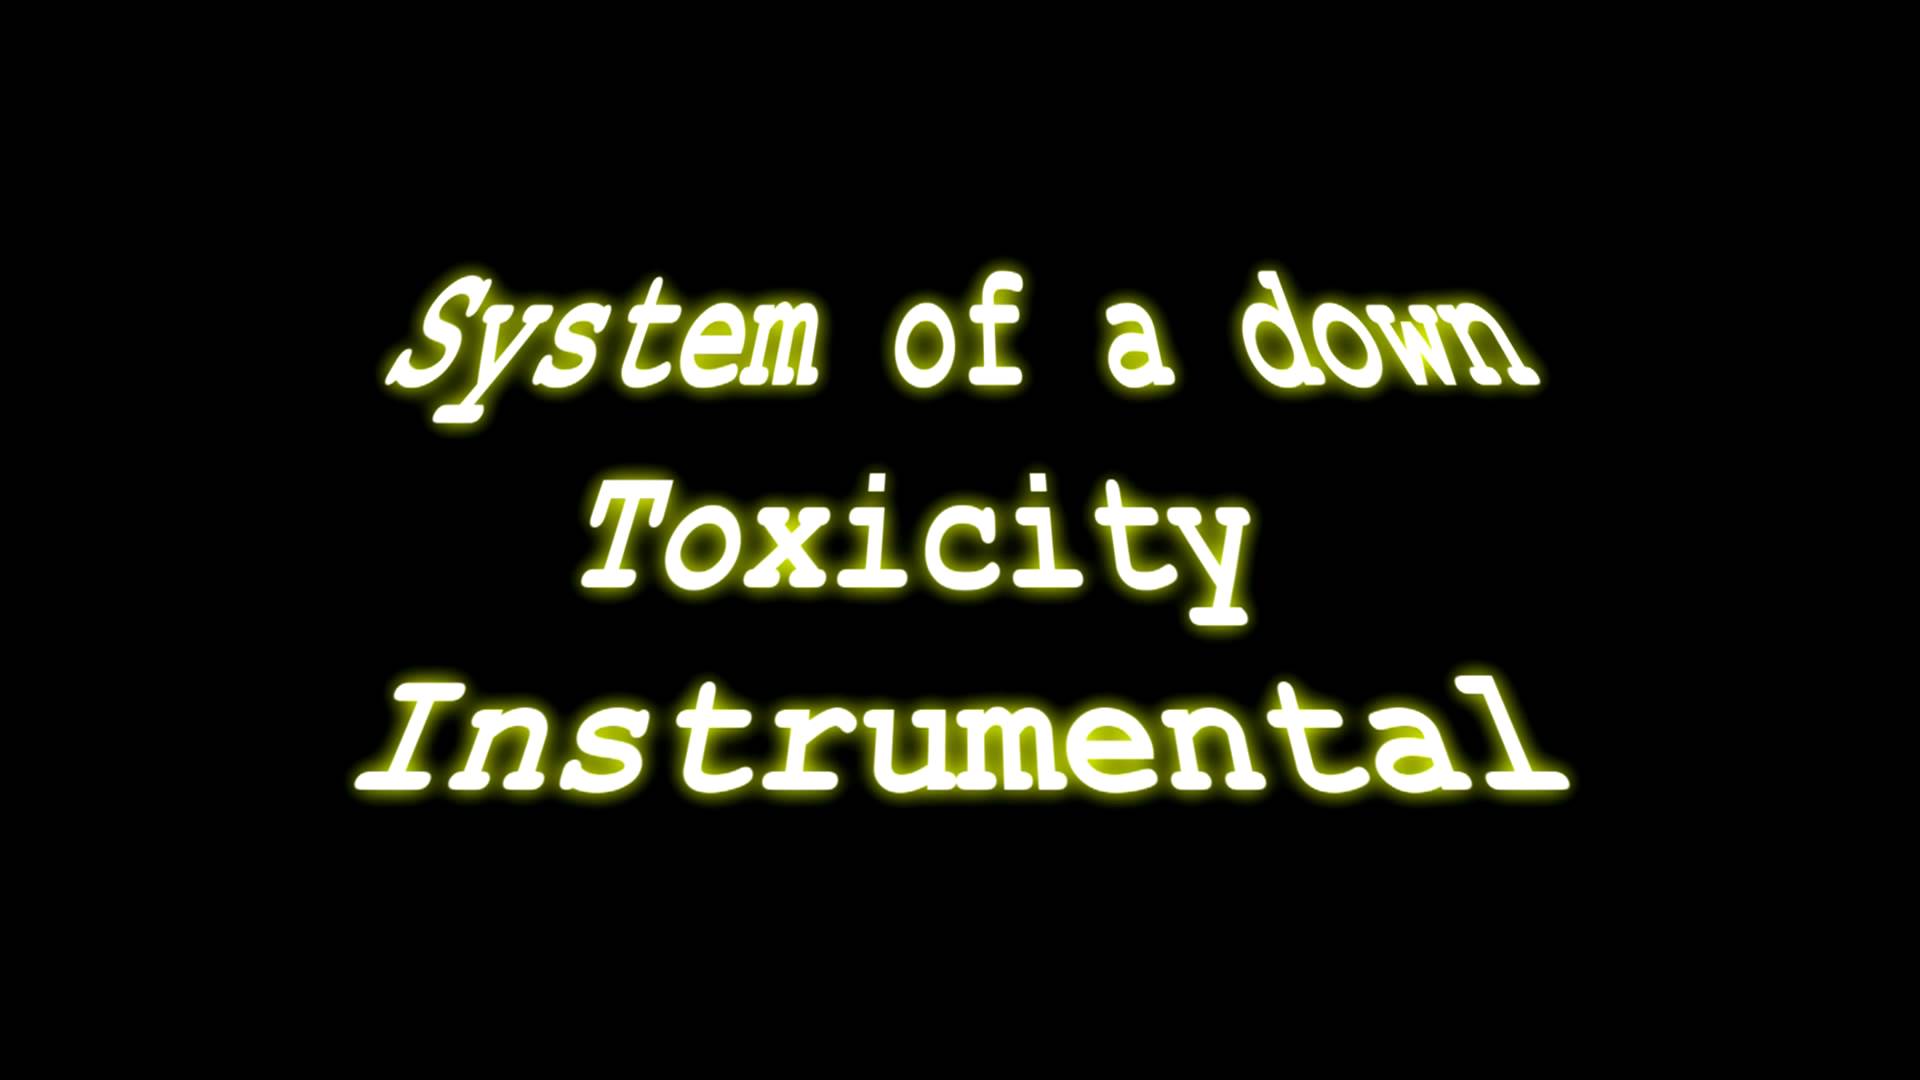 System of a down toxicity текст. Toxicity Instrumental. SOAD Toxicity. Toxicity System of a down текст. System of a down Wallpaper.